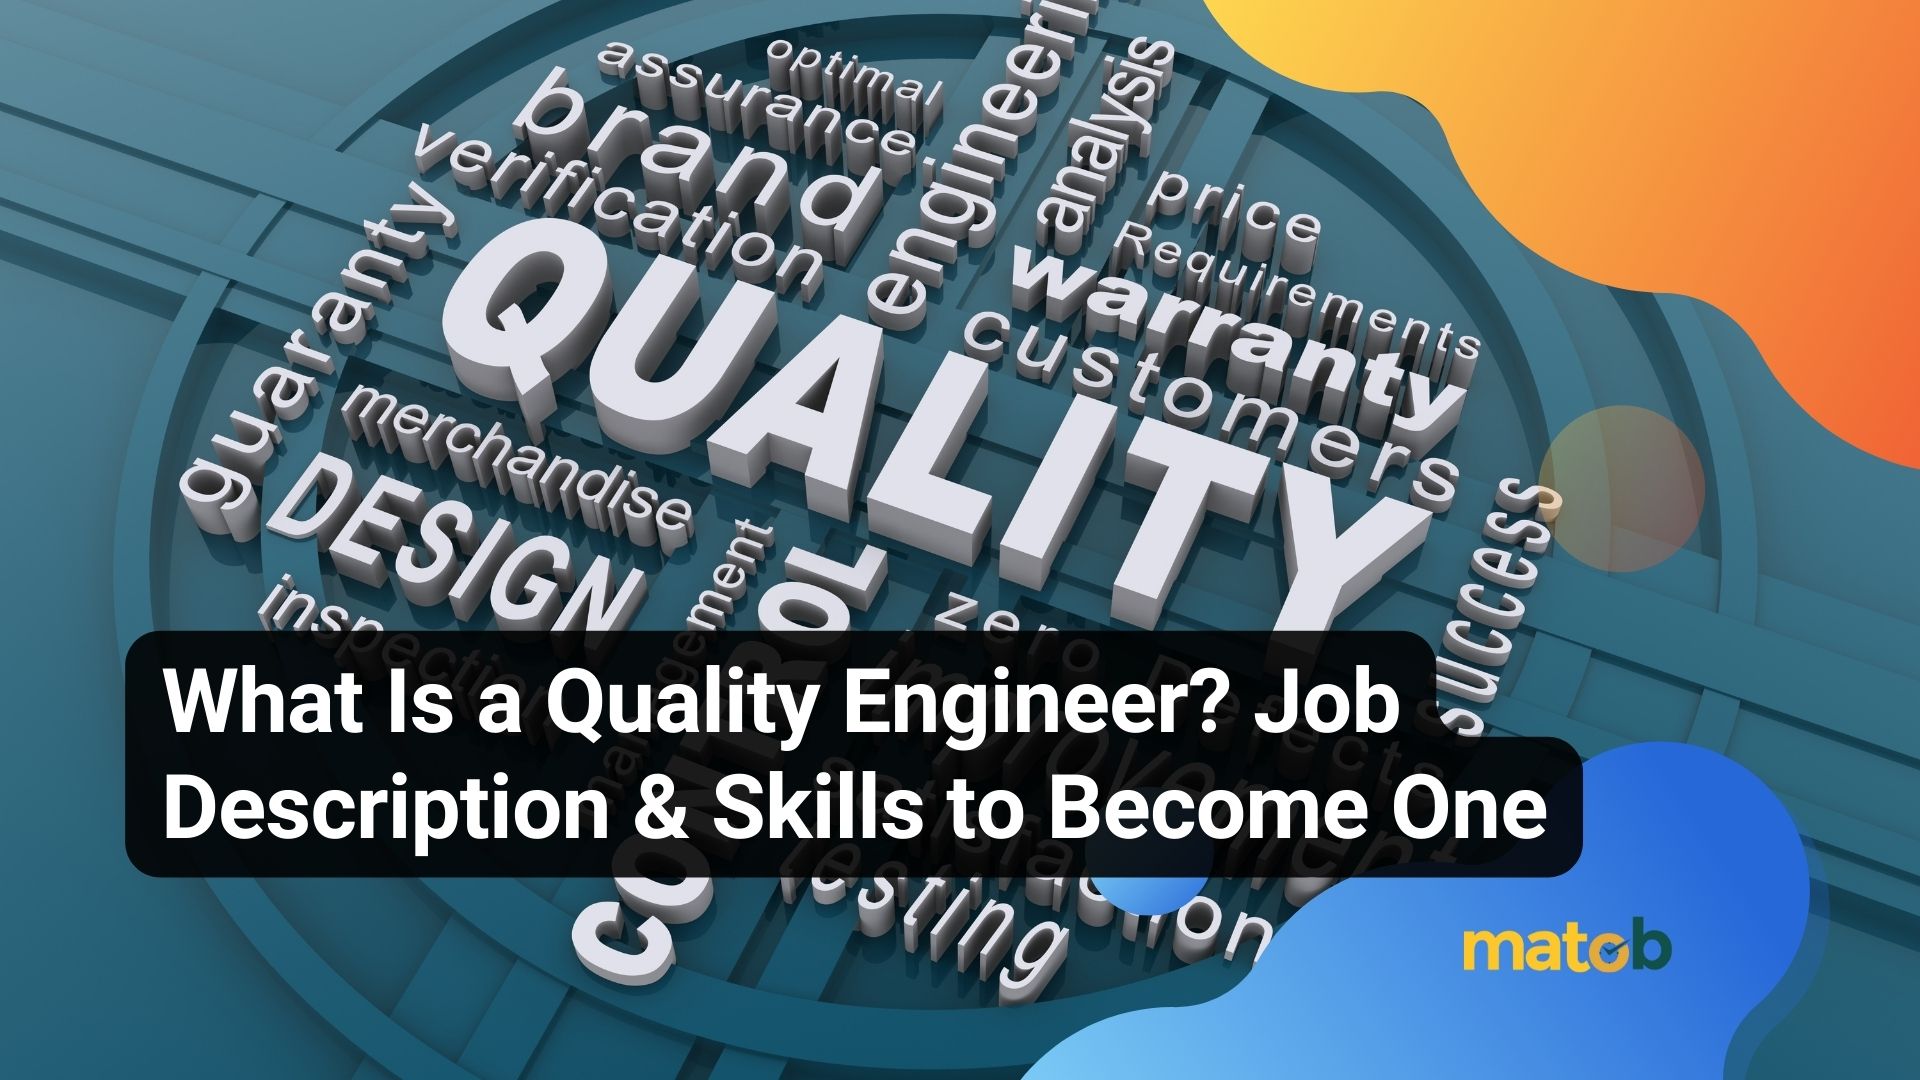 What Is a Quality Engineer? Job Description & Skills to Become One